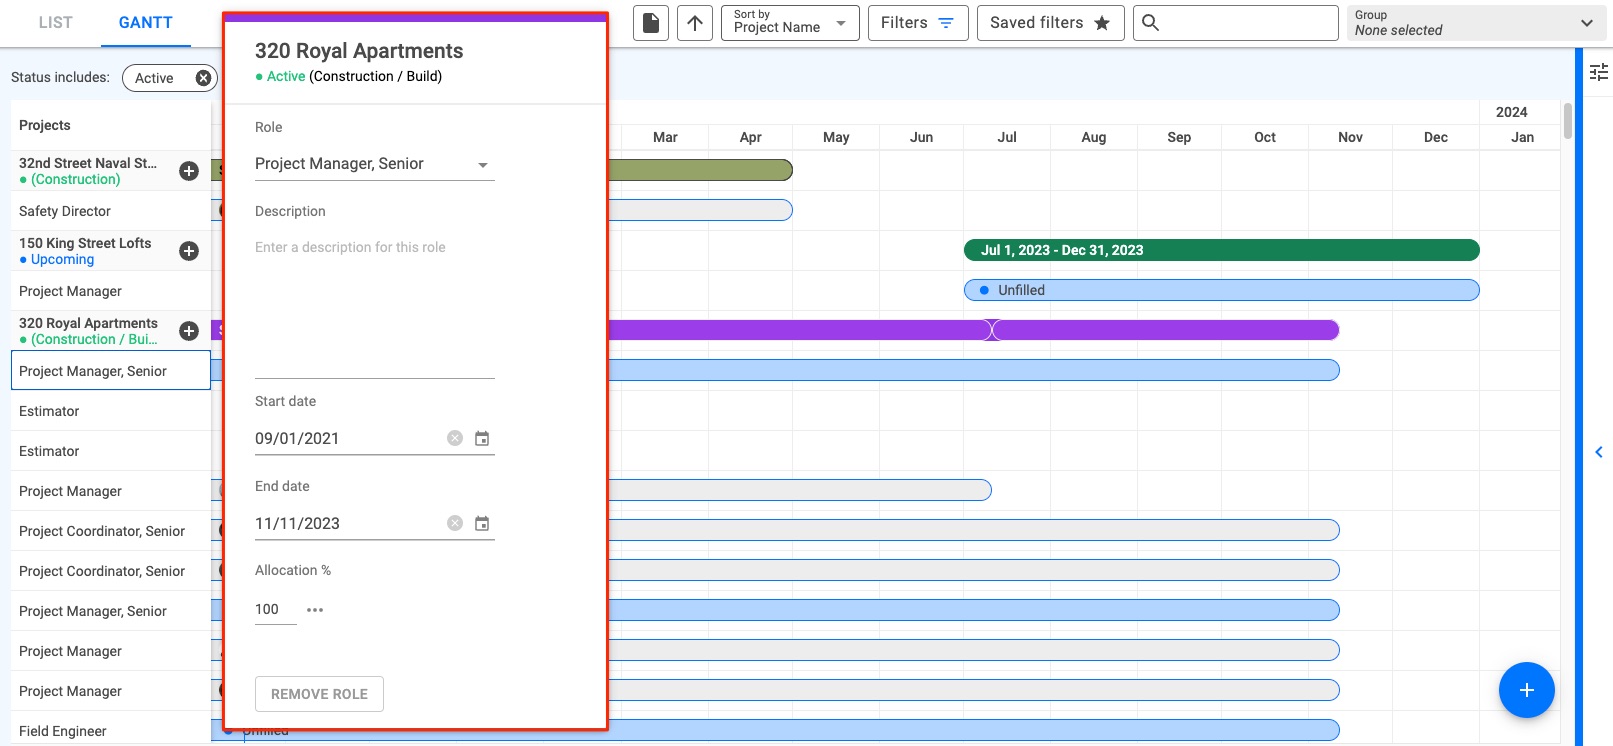 Article_Update_-_Managing_Roles_and_Allocations_From_the_Project_Gantt_-_1_8.jpg